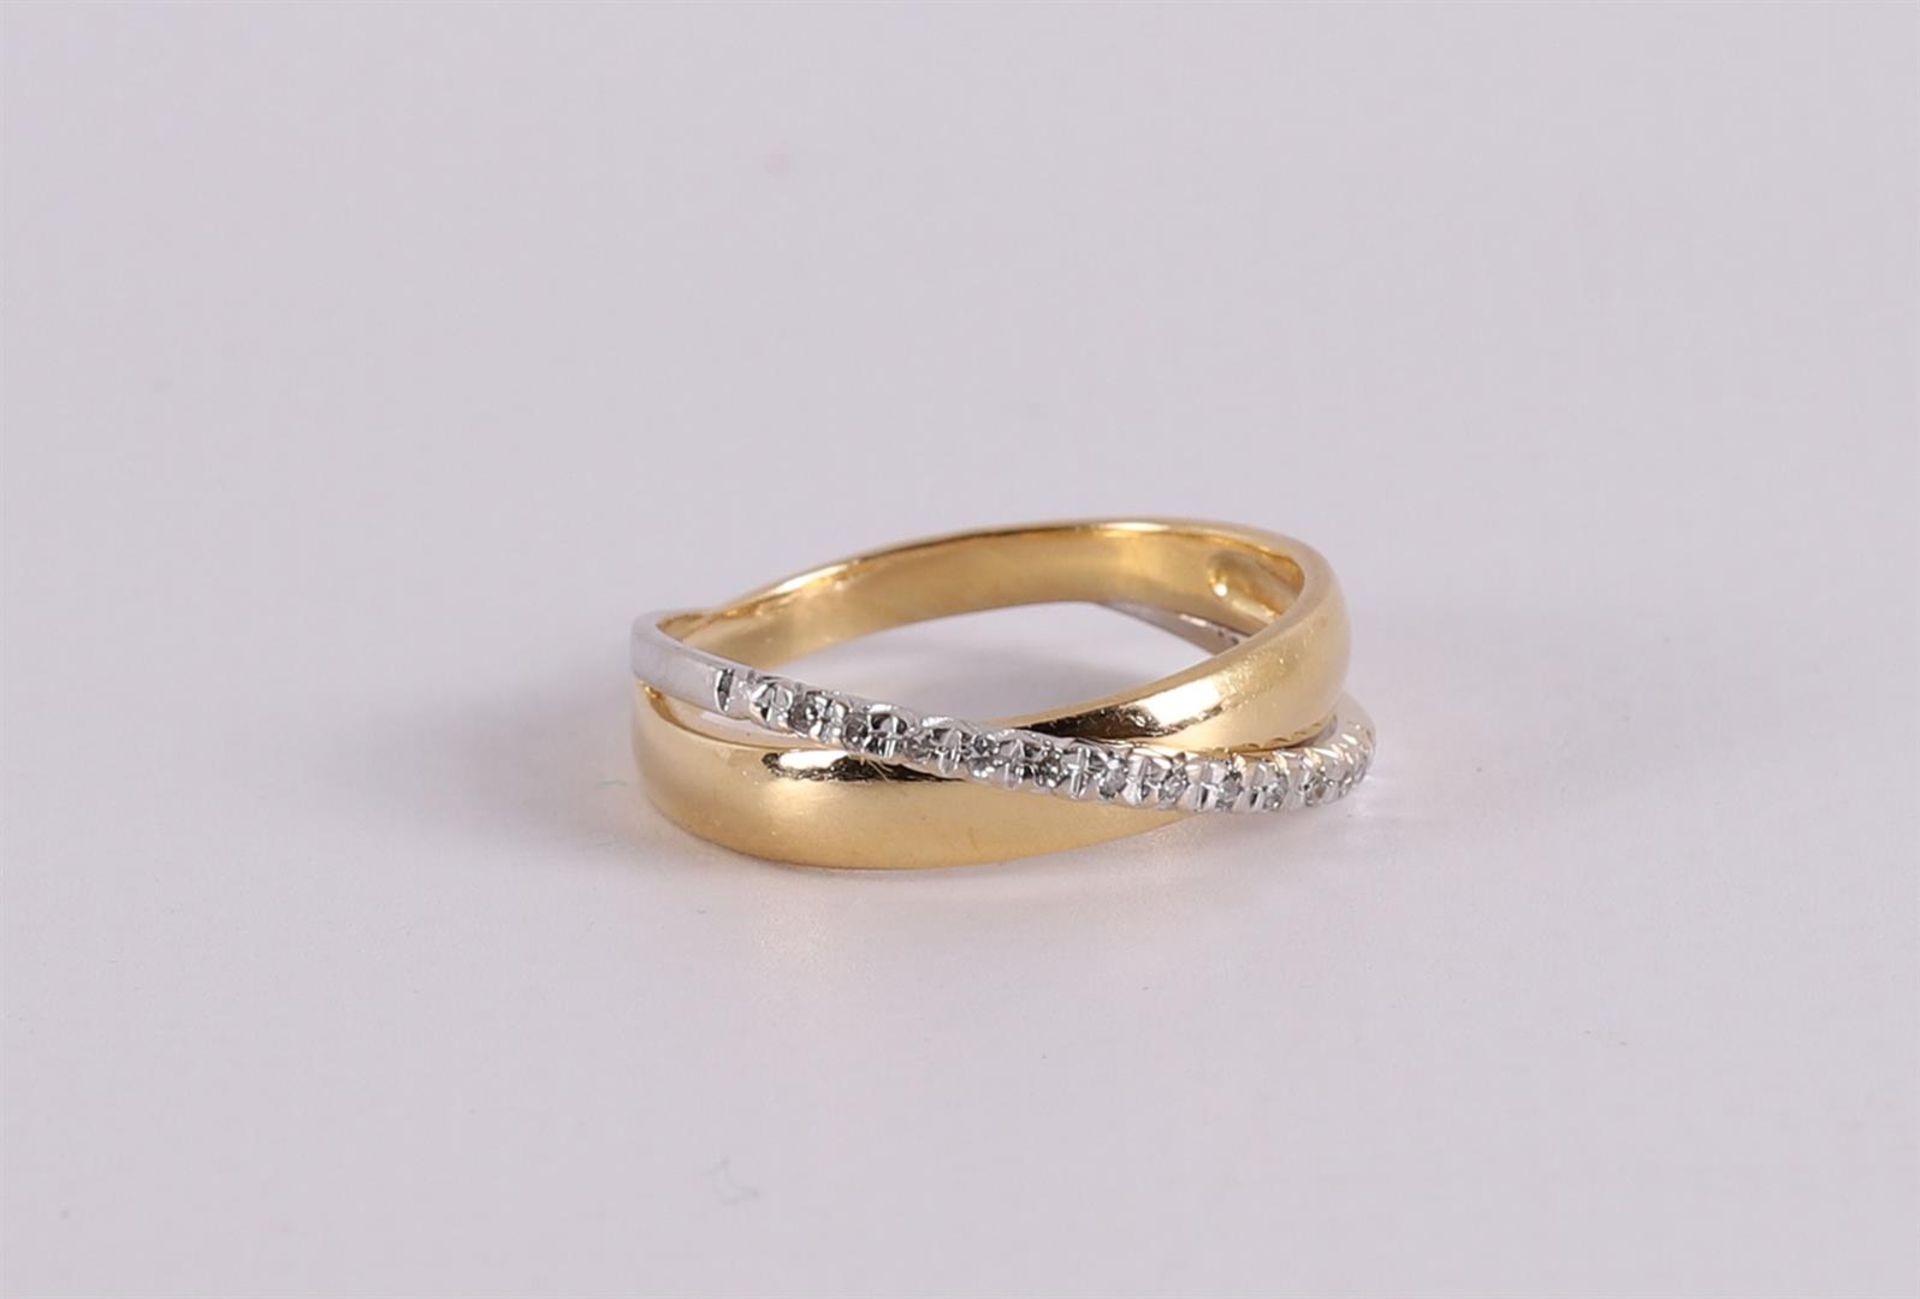 An 18 kt gold crossover ring with 12 octagonal cut diamonds.